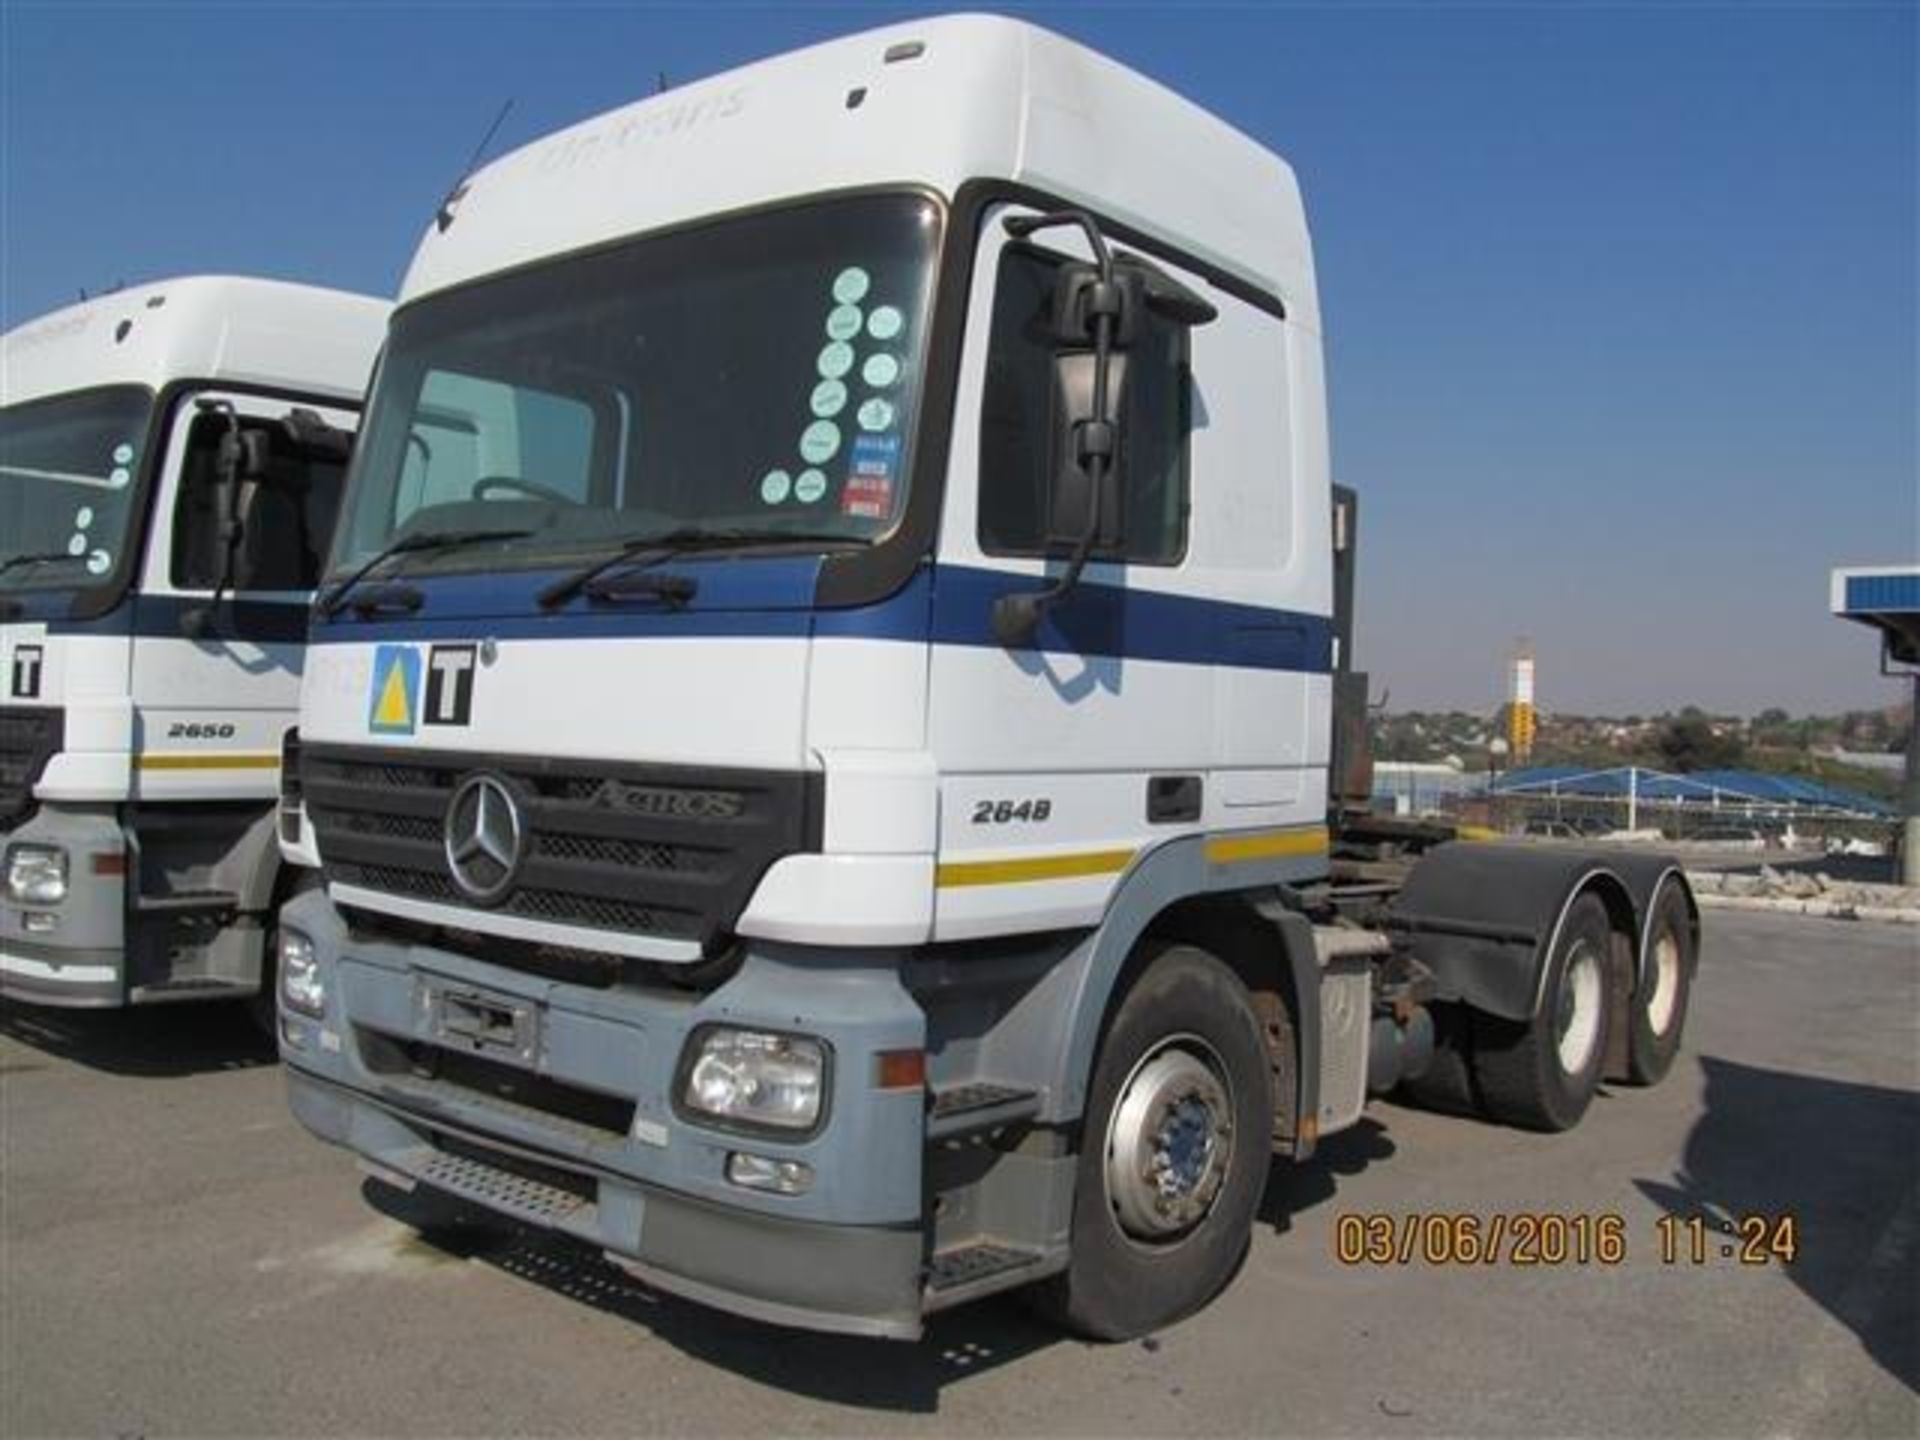 2007 M/BENZ ACTROS 2648 6X4 T/T - (VWY184GP) - Image 2 of 8